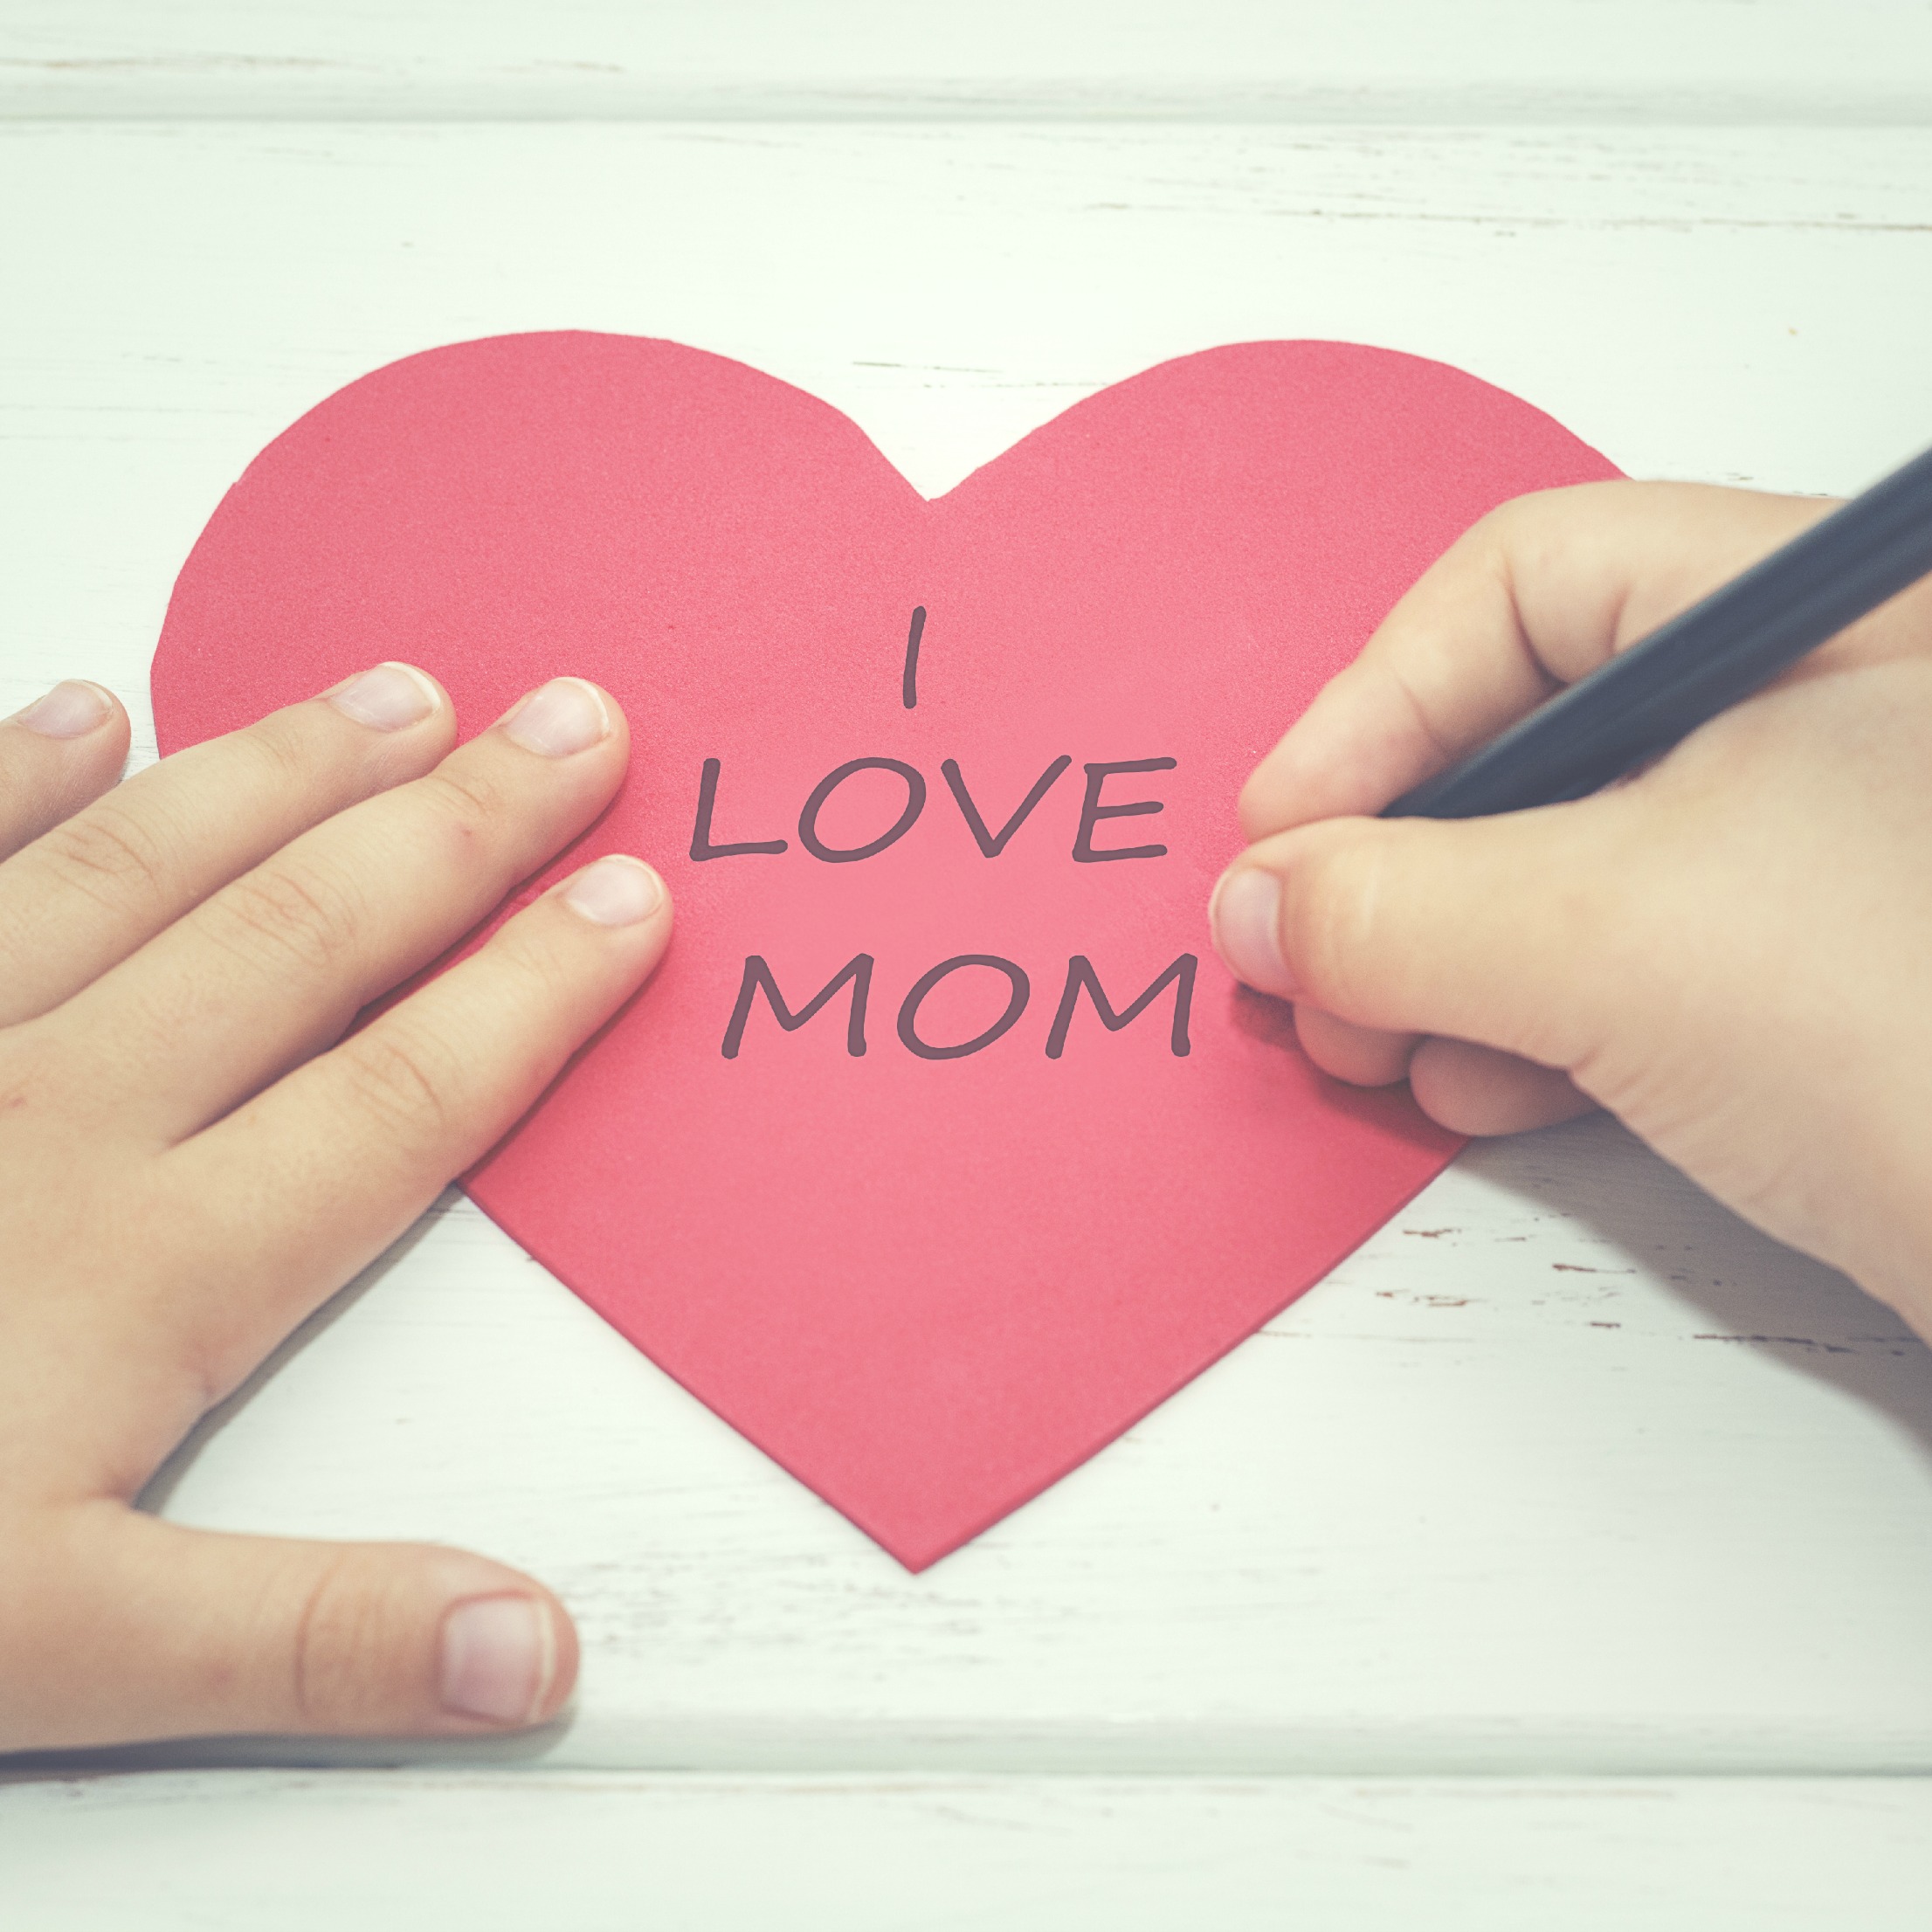 3 Ways Mother’s Day Changes When You Become a Mom